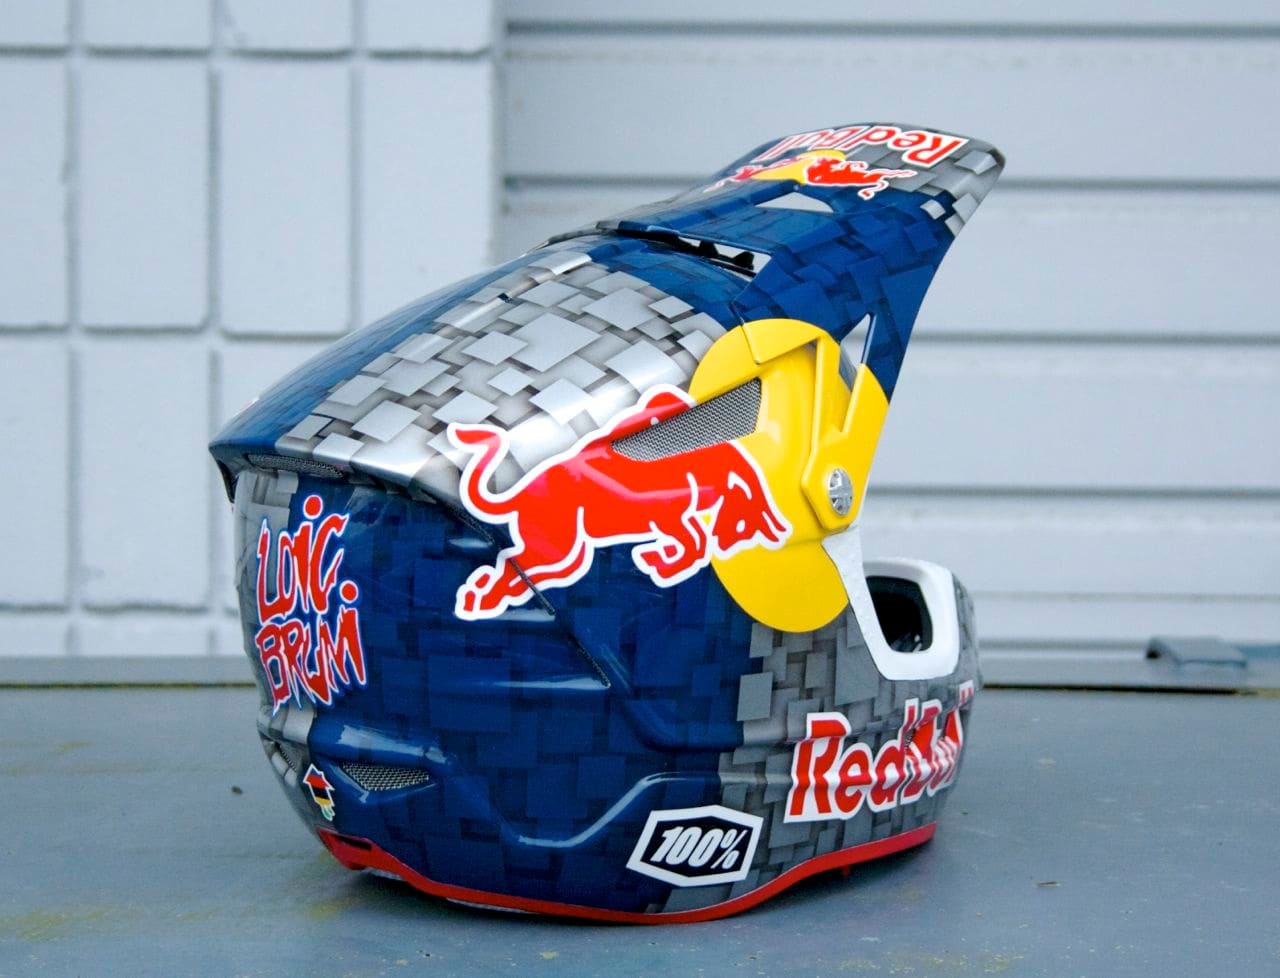 Custom painted Red Bull helmets by Stacy Glaser